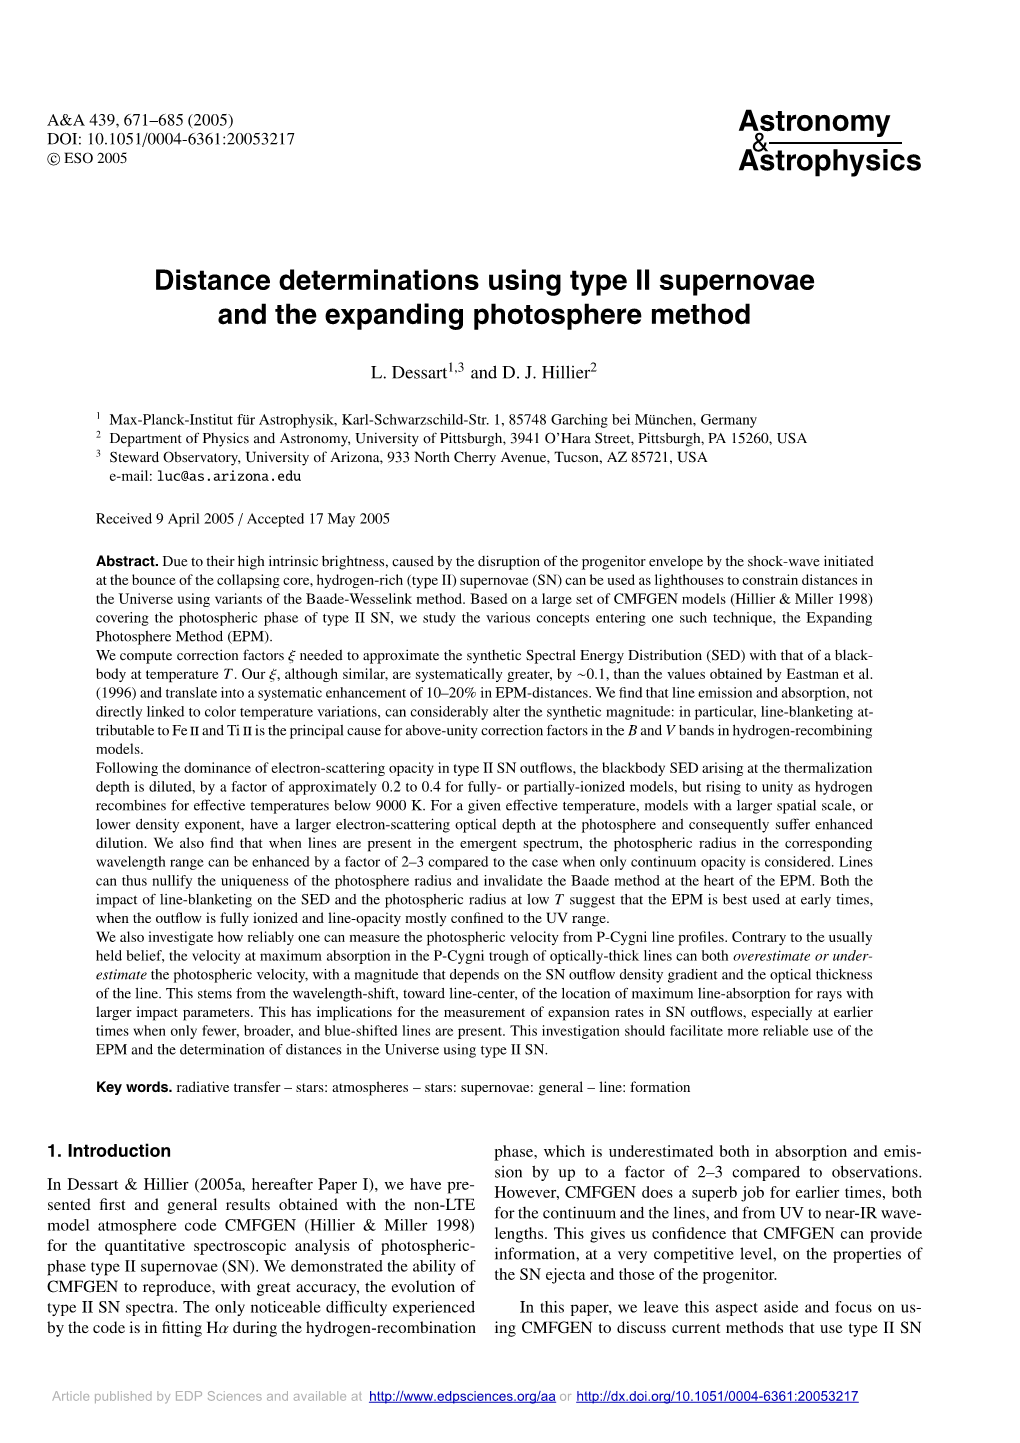 Distance Determinations Using Type II Supernovae and the Expanding Photosphere Method